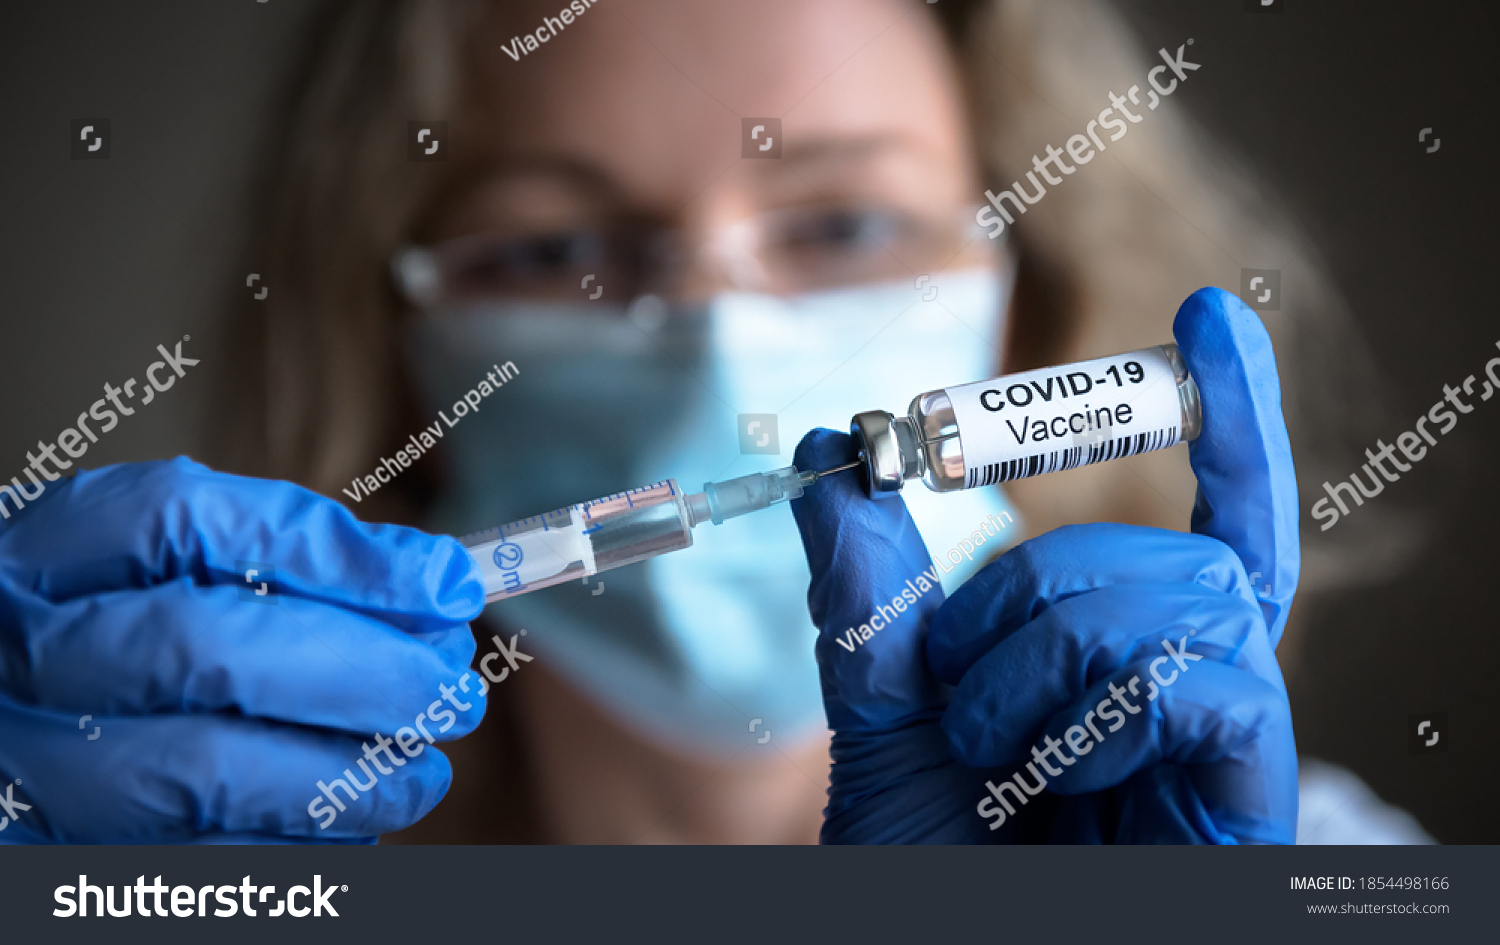 COVID-19 vaccine in researcher hands, female doctor's holds syringe and bottle with vaccine for coronavirus cure. Concept of corona virus treatment, injection, shot and clinical trial during pandemic #1854498166